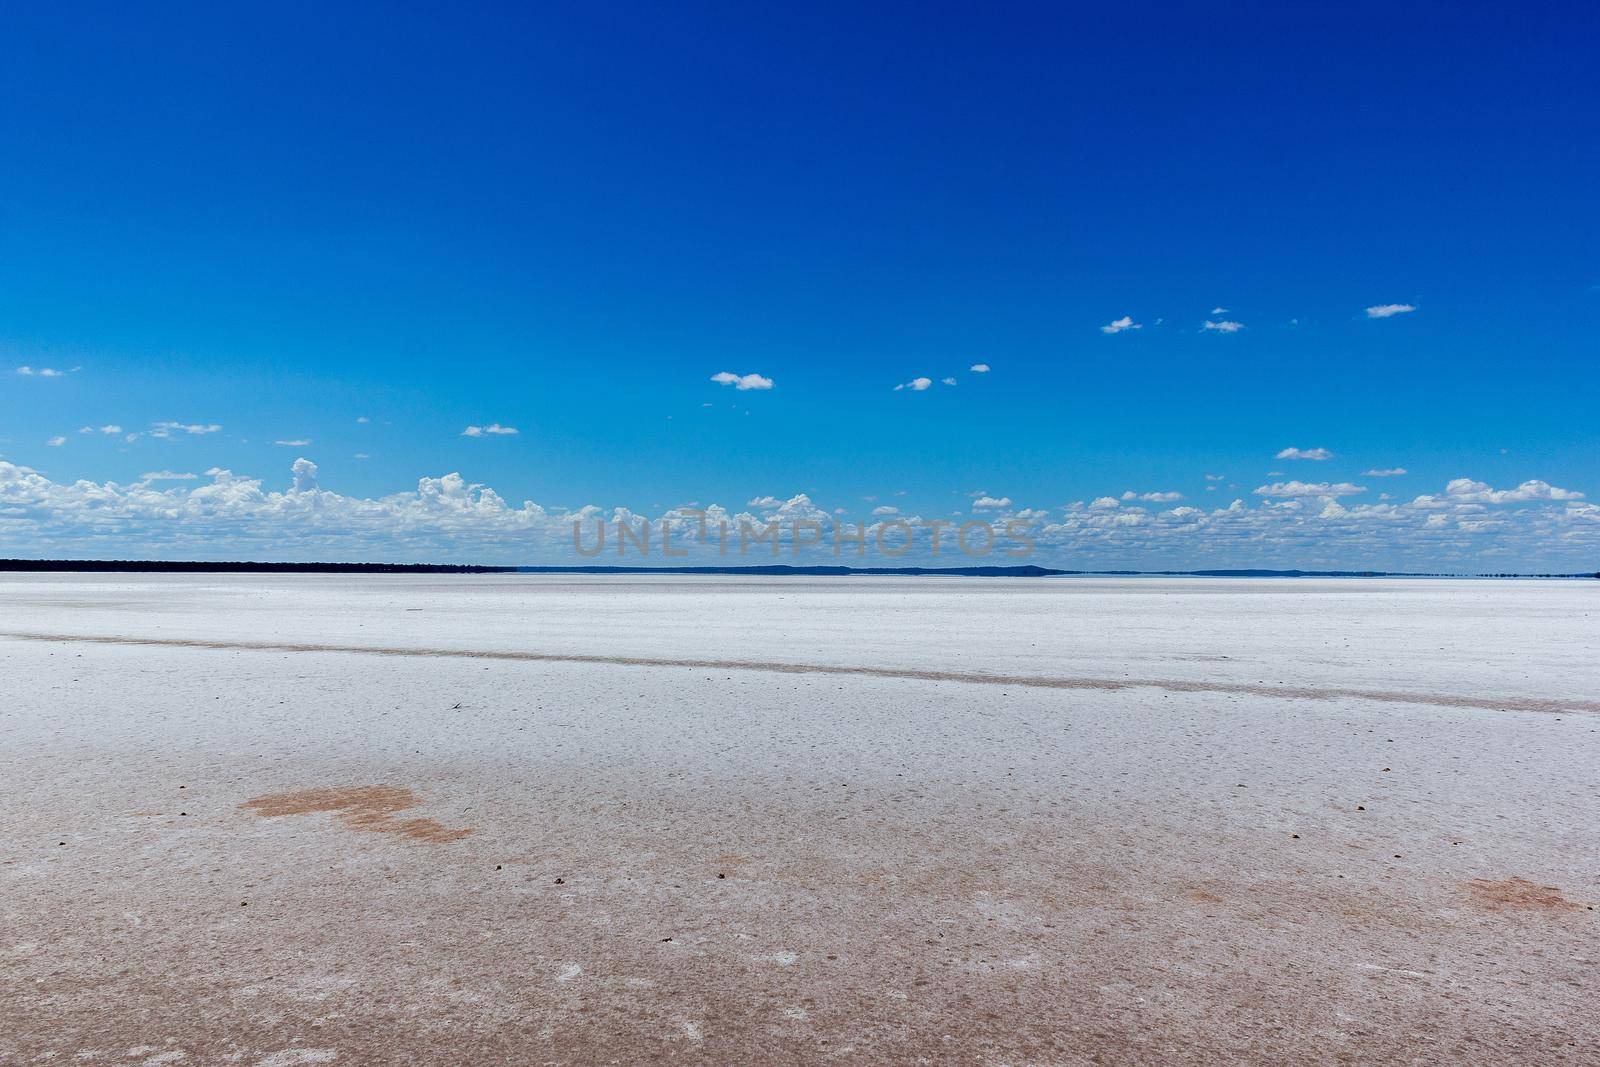 Salt lake in Western Australia with some clouds, Australia by bettercallcurry